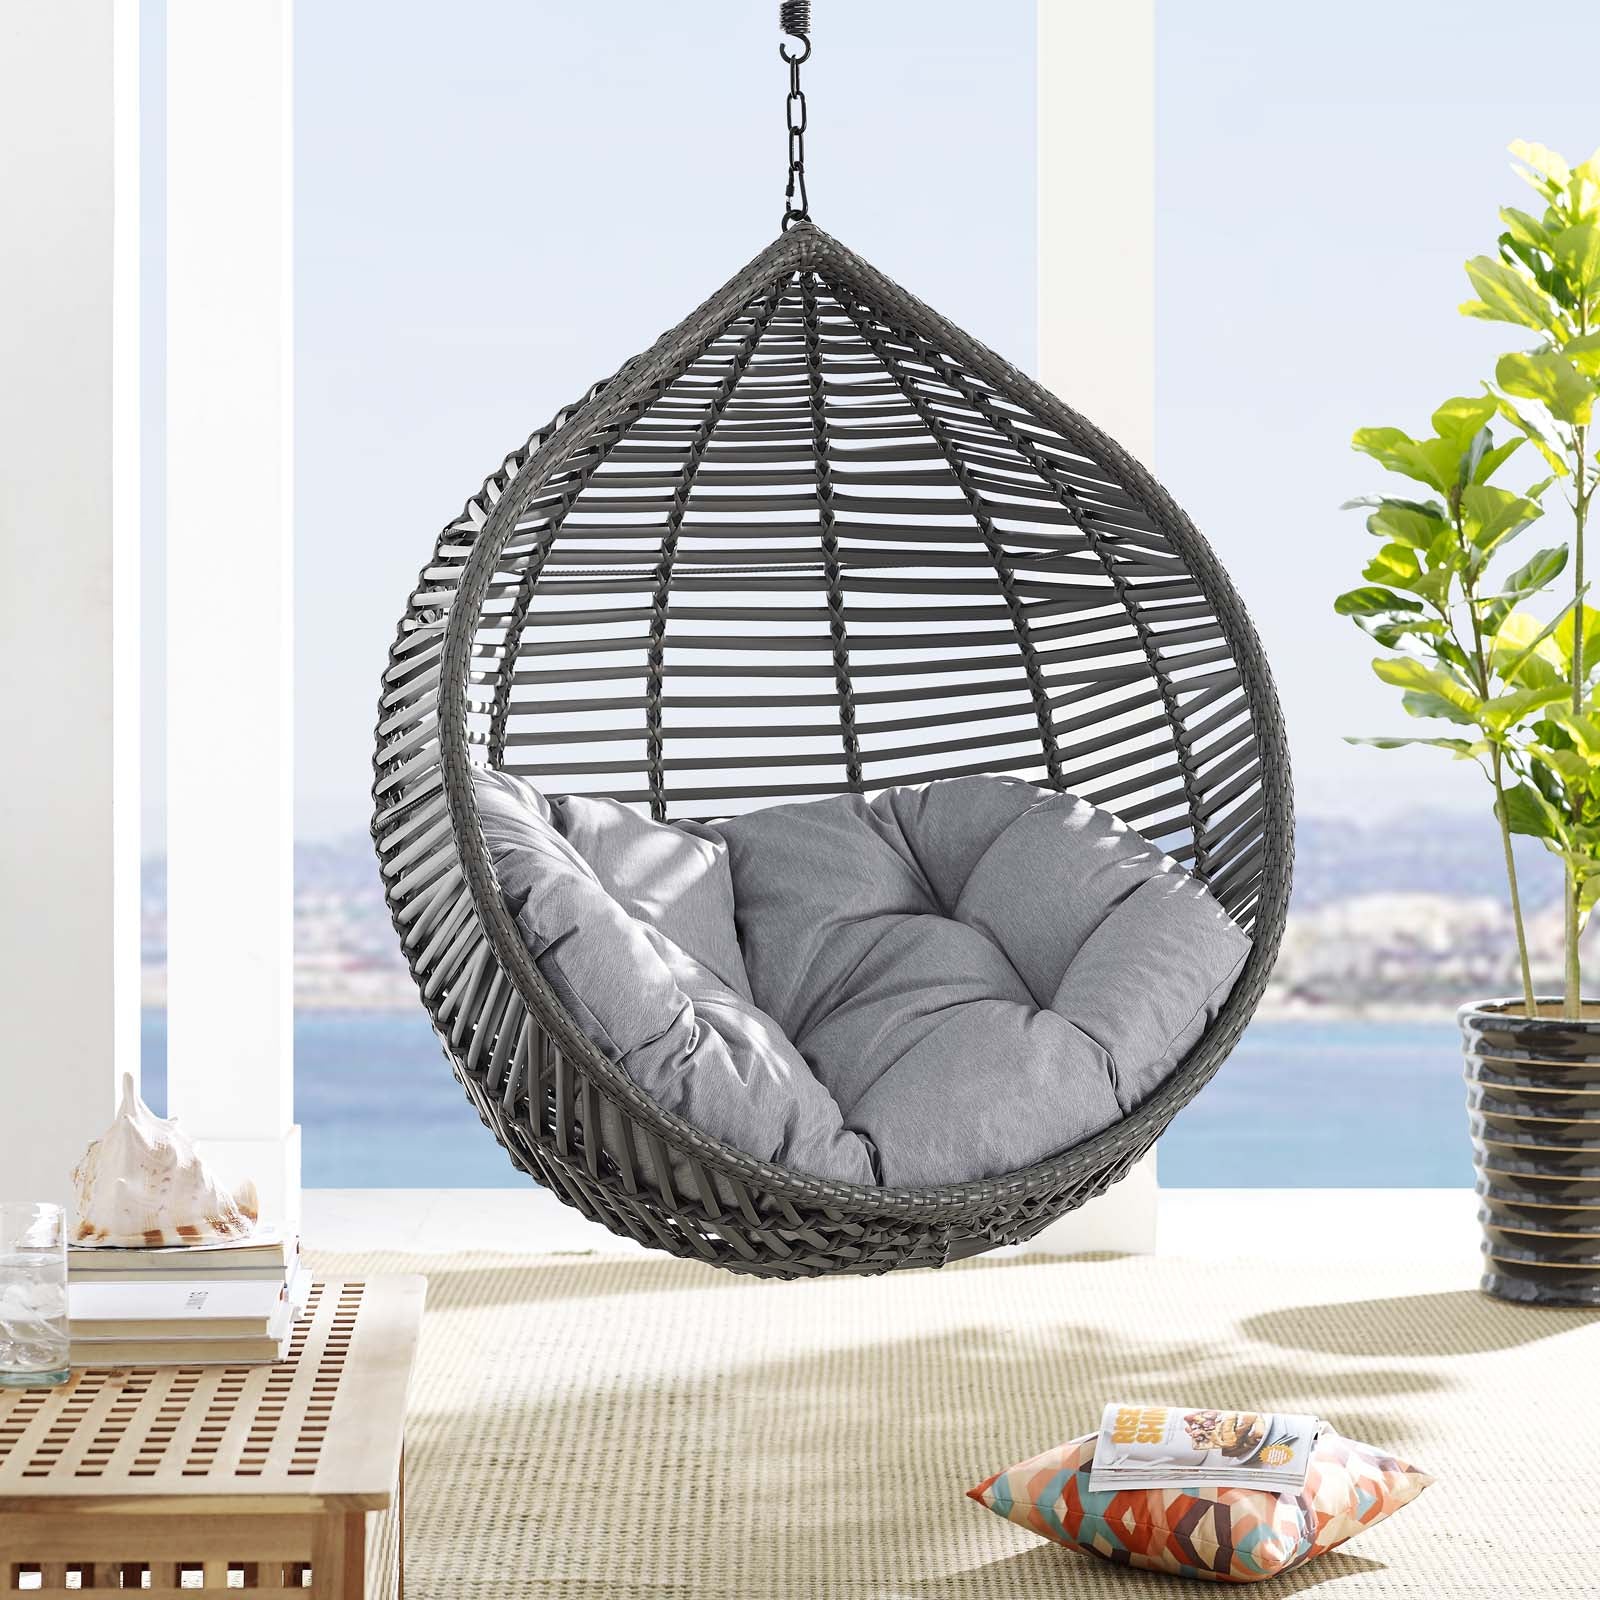 Garner Teardrop Outdoor Patio Swing Chair Without Stand